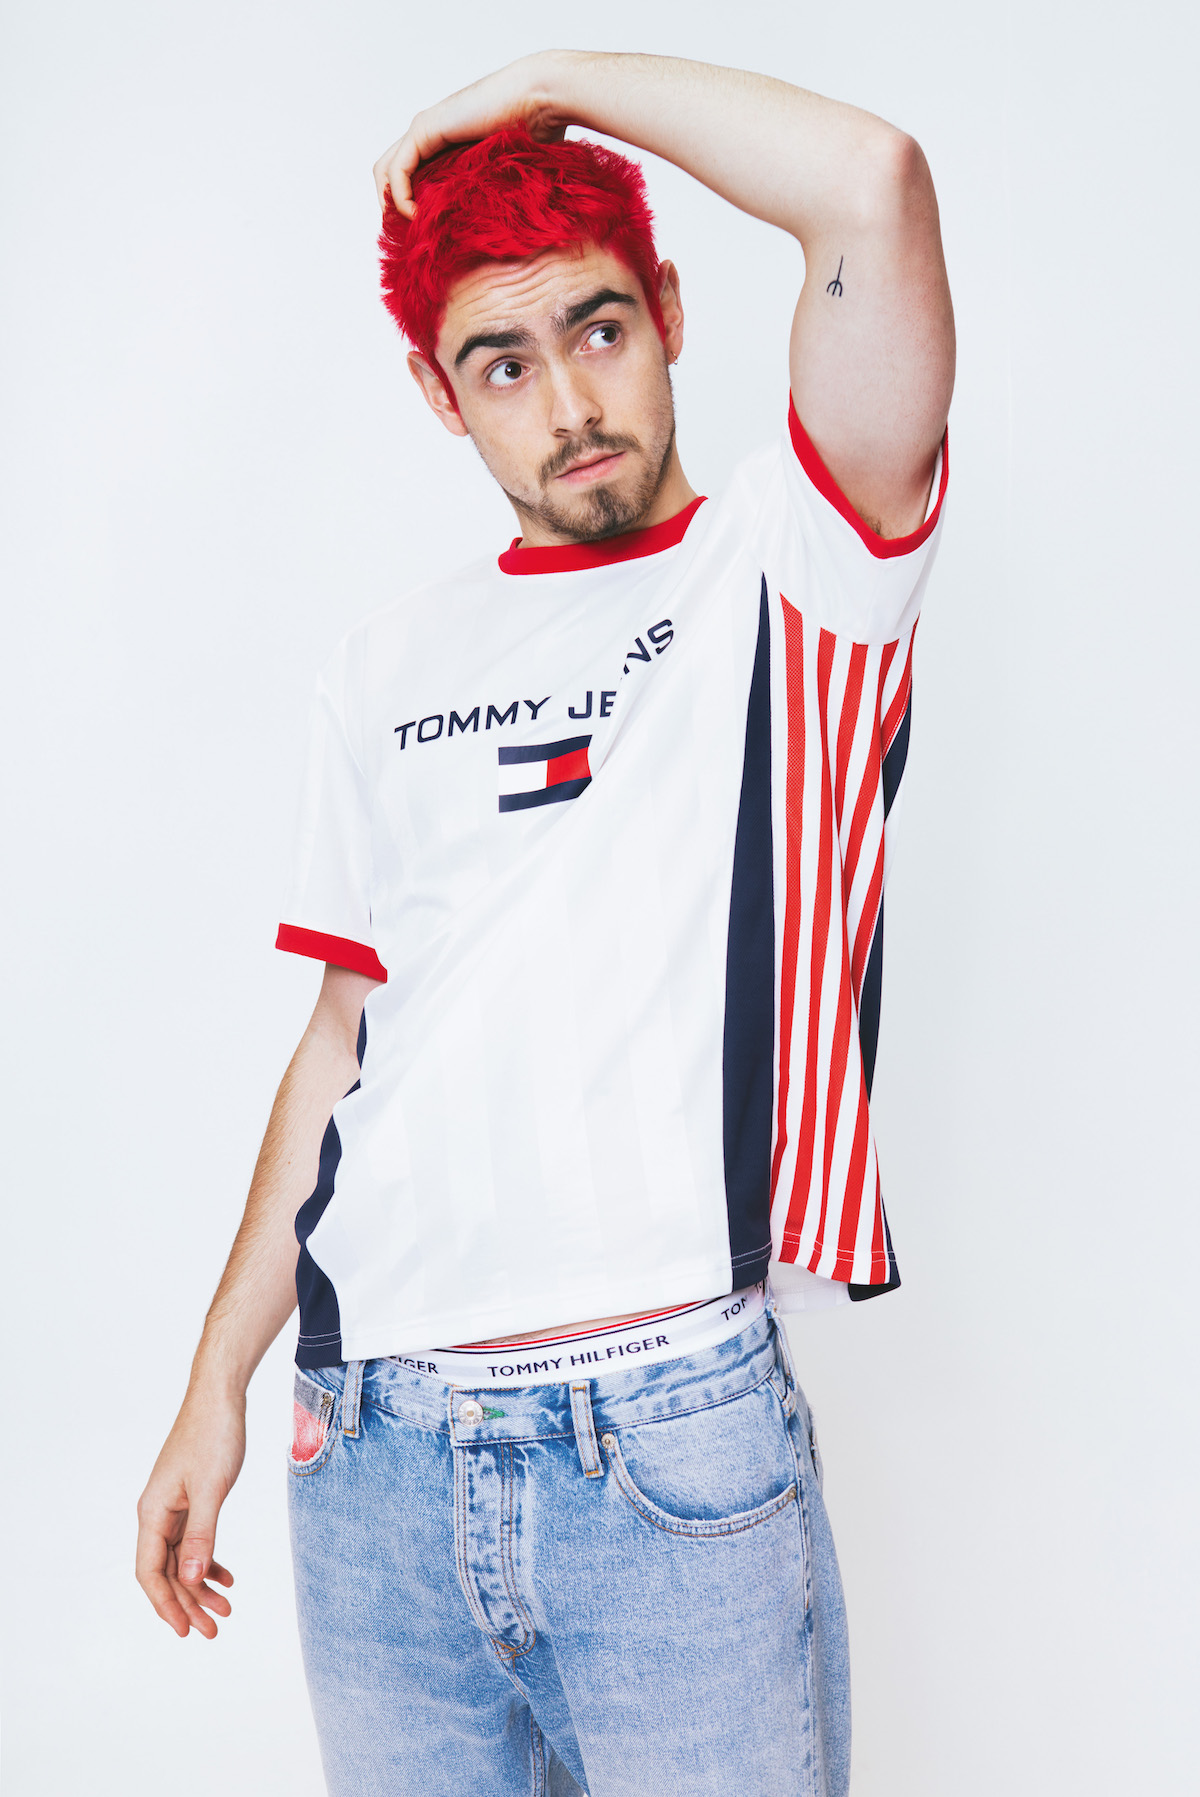 tommy jeans capsule collection